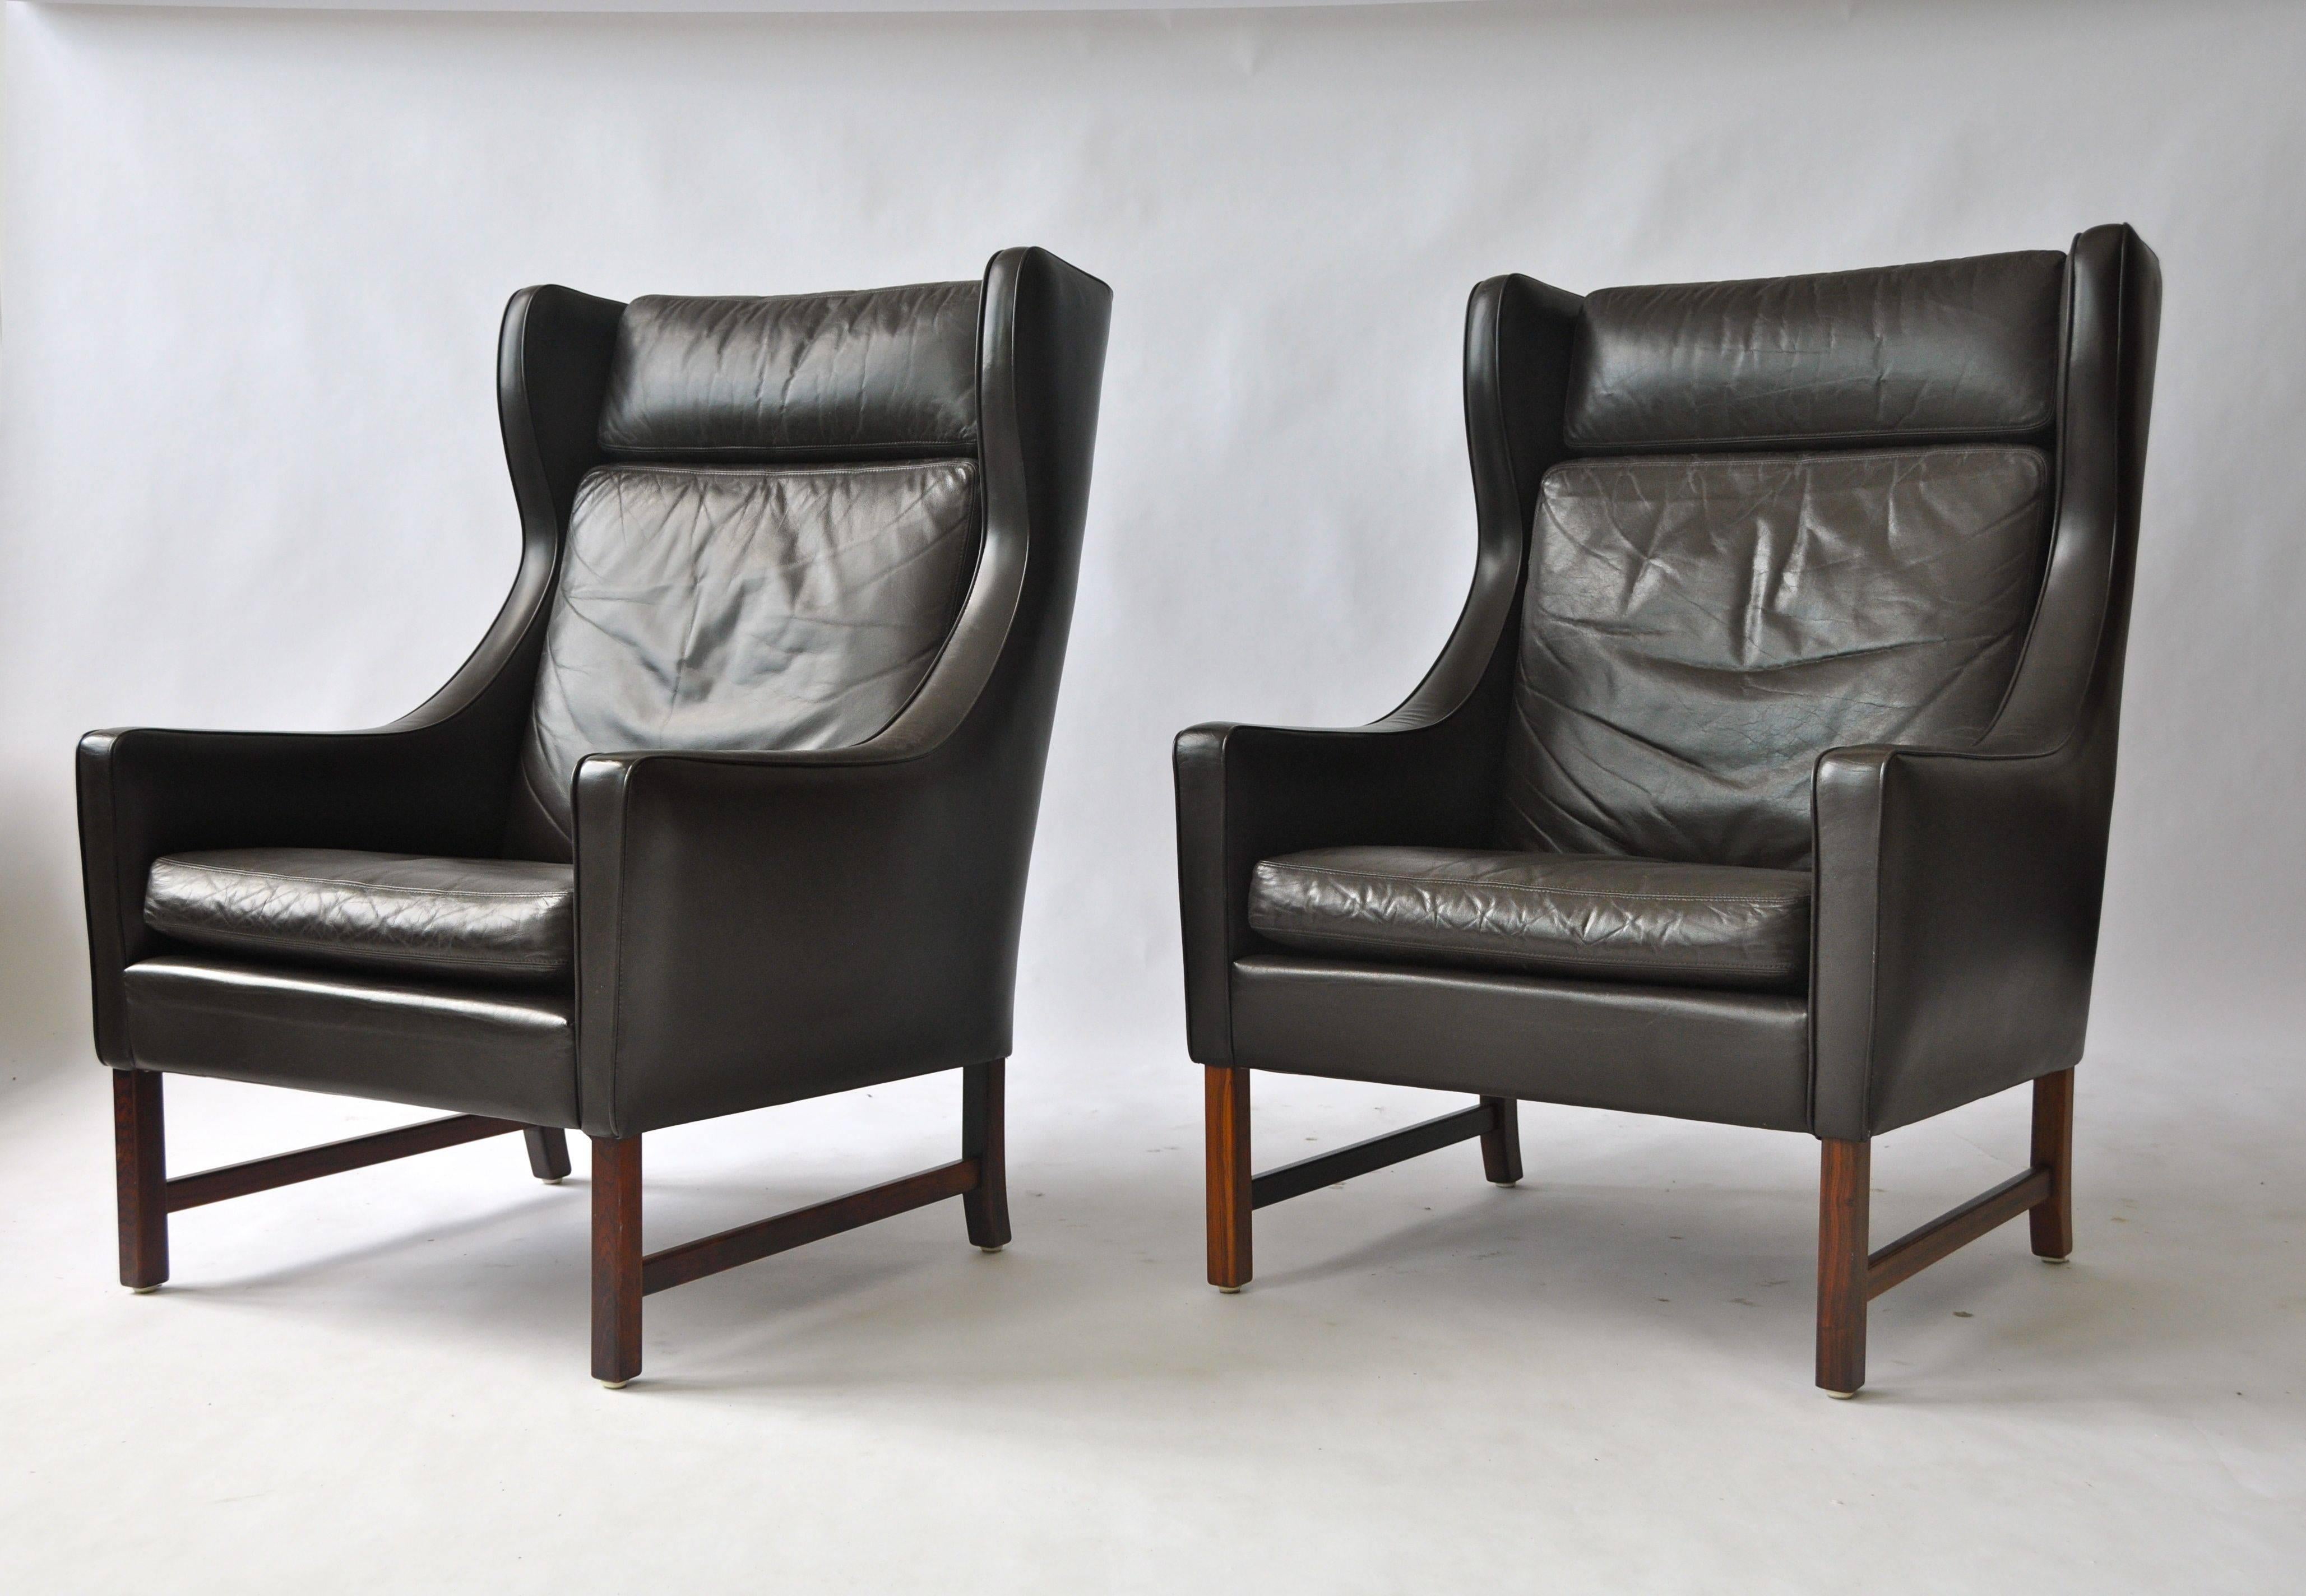 Pair of Frederik Kayser leather wing chairs. Rosewood base. Dark brown leather. Single ottoman with purchase. Produced by Vatne Møbler, Norway, model 965. Designed in 1964.